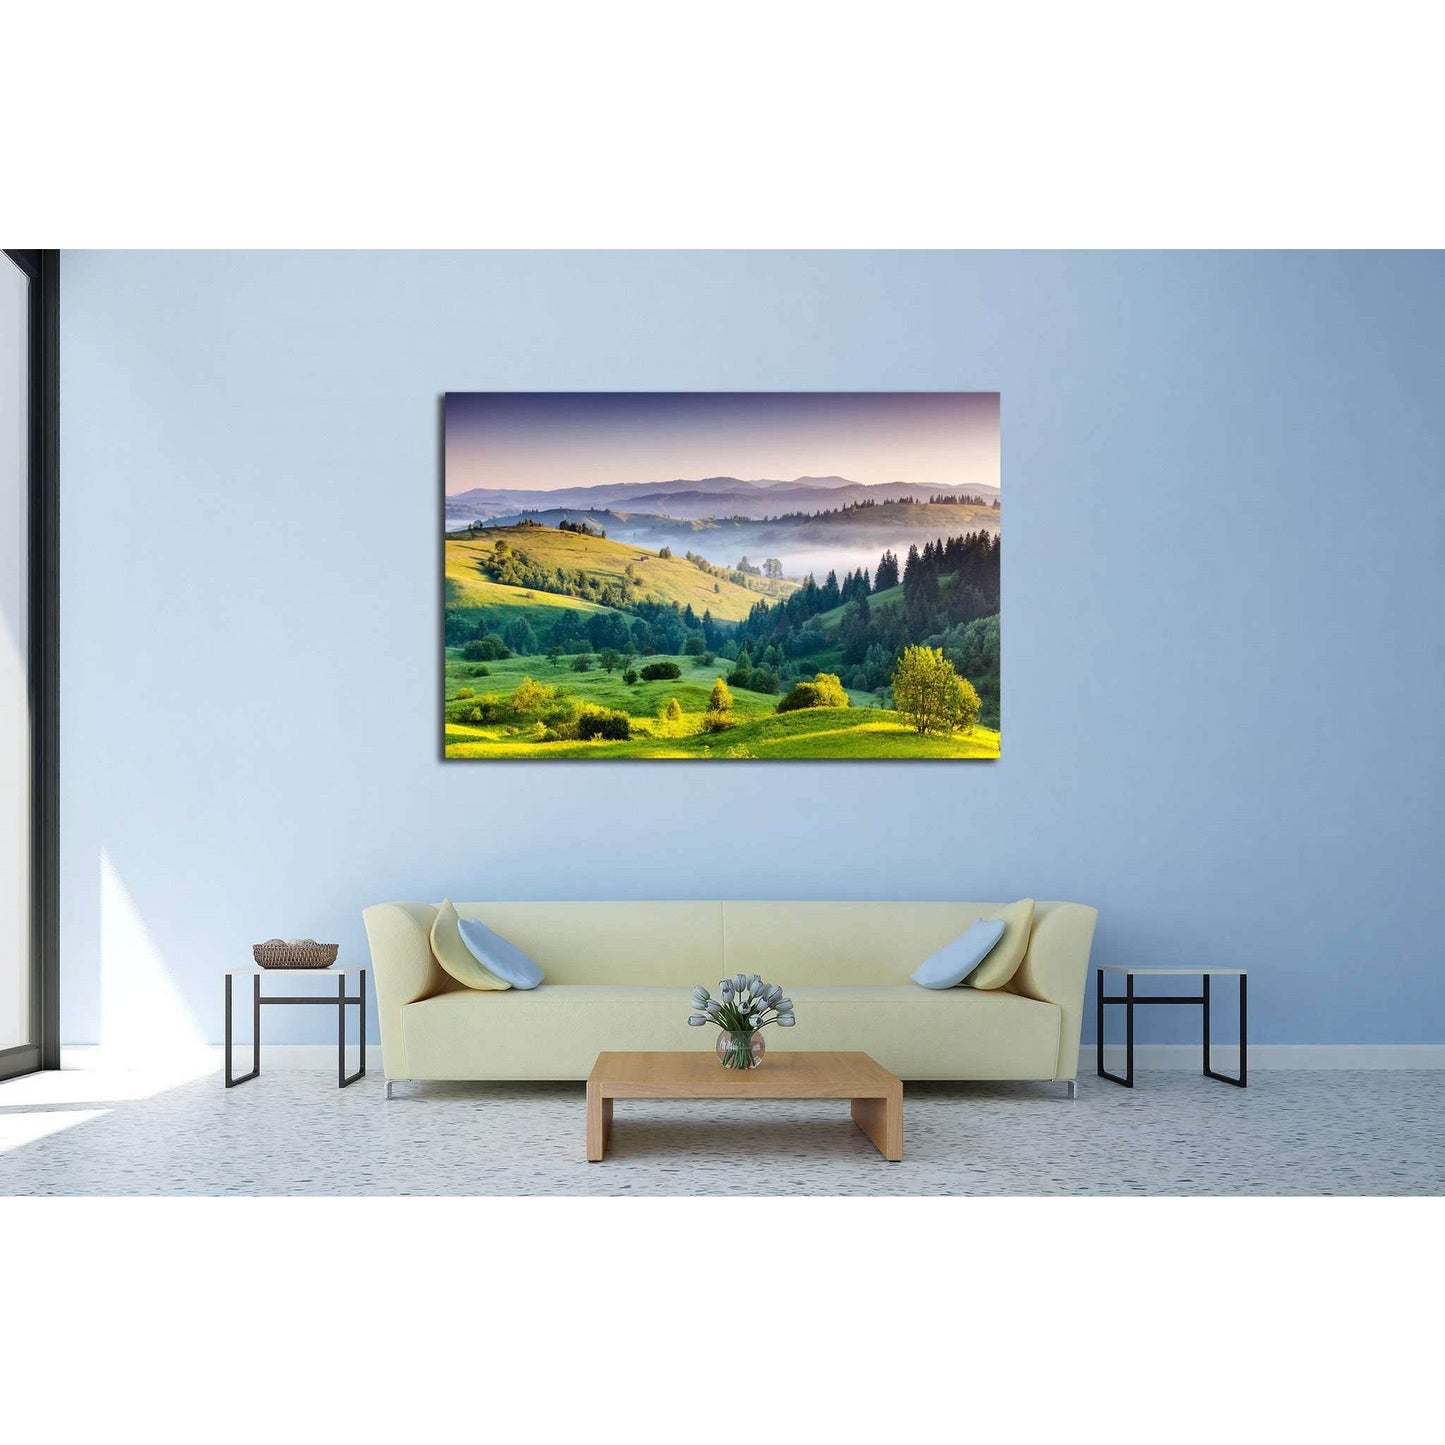 Carpathian Sunrise Landscape Canvas for Cozy Living Room DecorThis canvas print captures the rolling hills and lush greenery of the Carpathian landscape bathed in the soft light of dawn. The warm golden hues and layers of mist create a serene and inviting